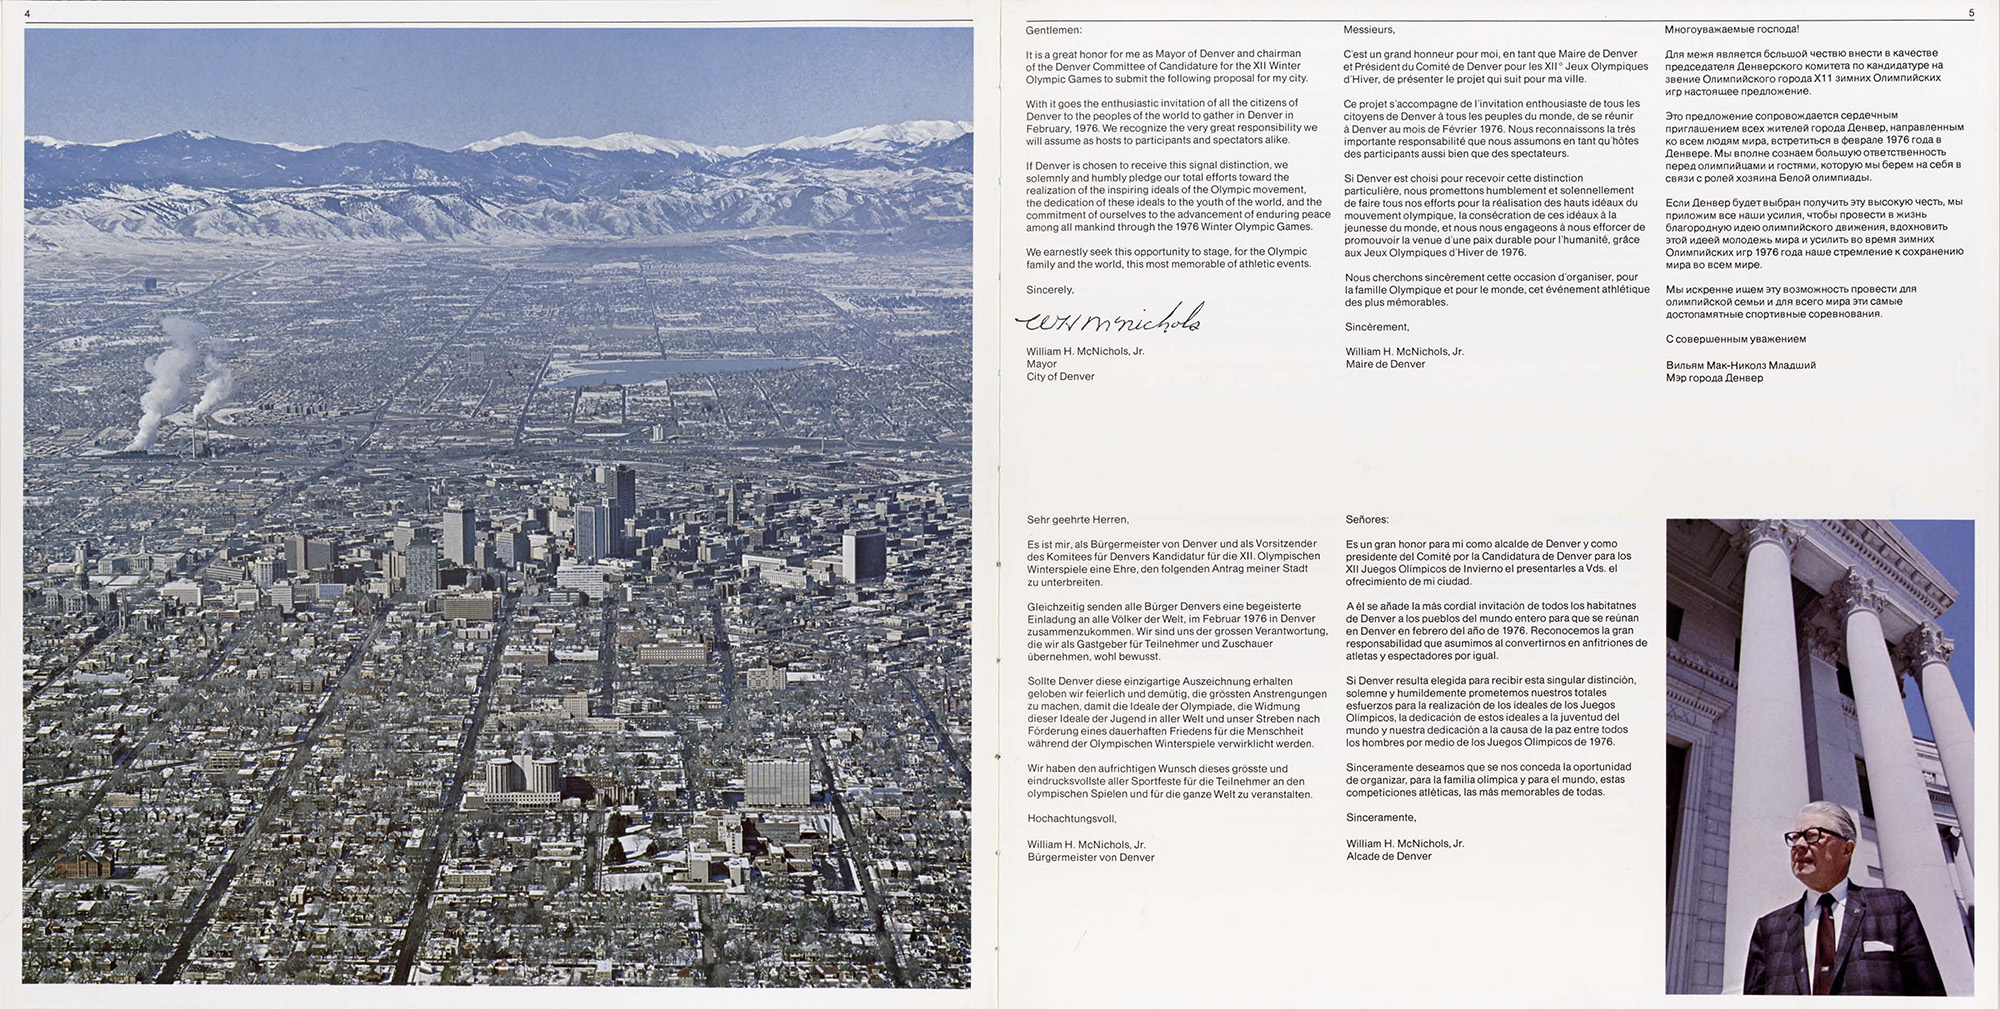 Introduction page from the official Denver 76 Olympic bid